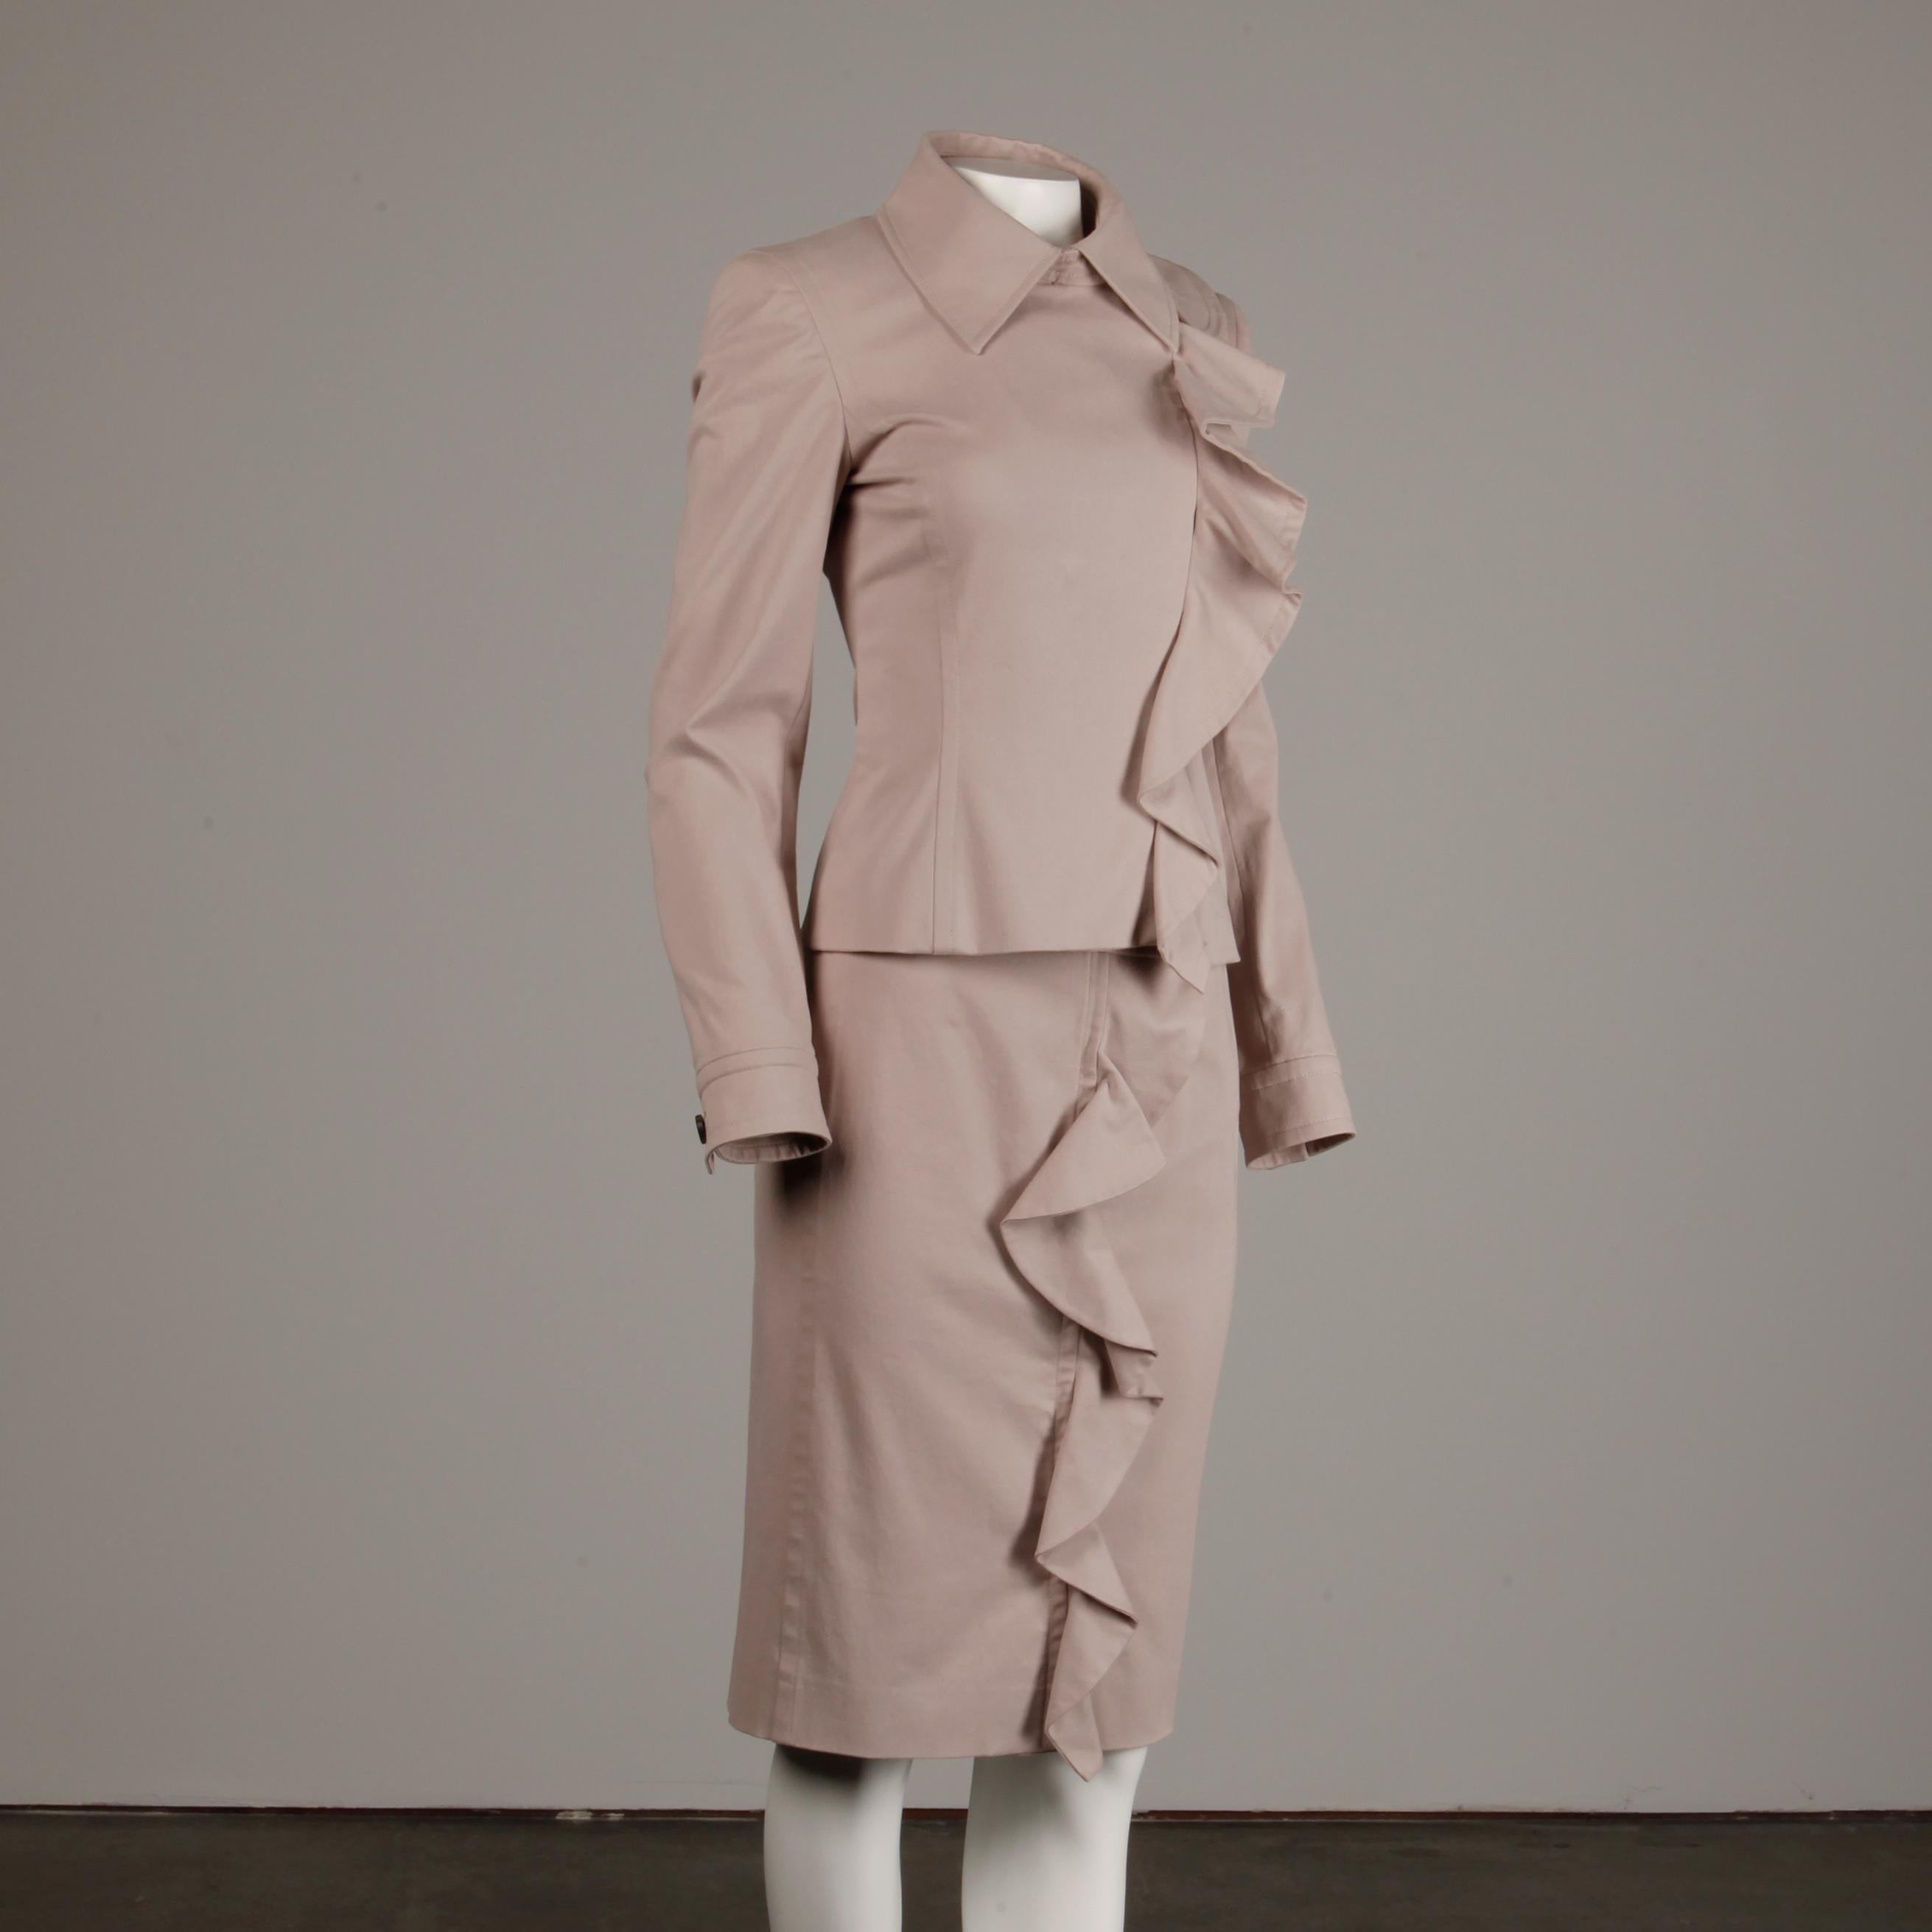 2003 Yves Saint Laurent by Tom Ford Pink Ruffle Jacket + Skirt Suit Ensemble YSL 3